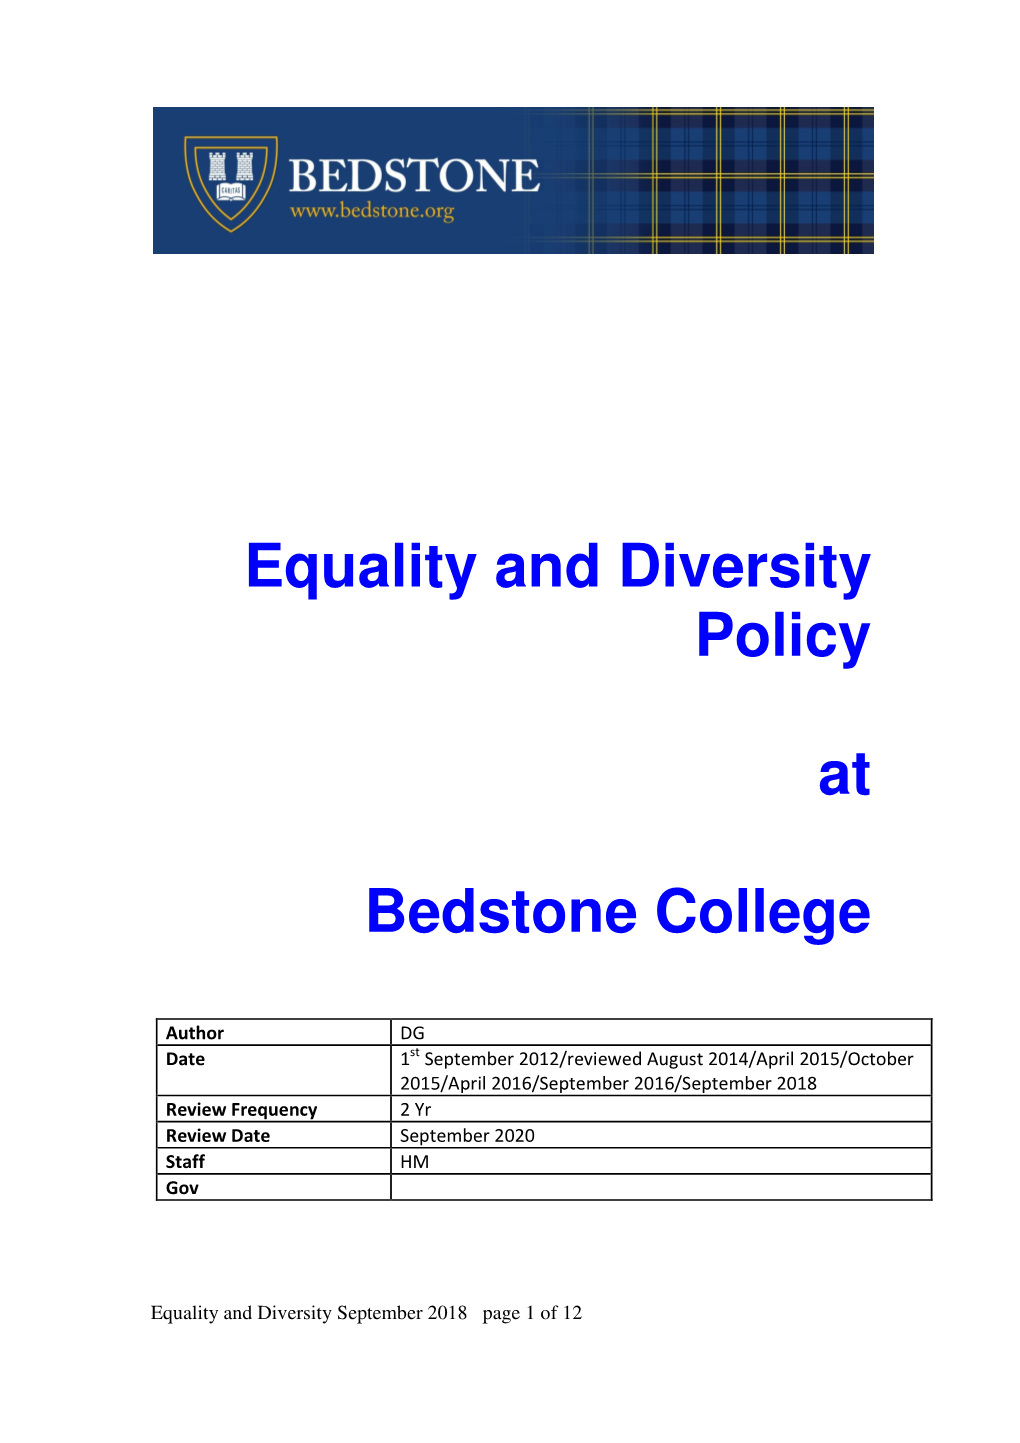 Equality and Diversity Policy at Bedstone College